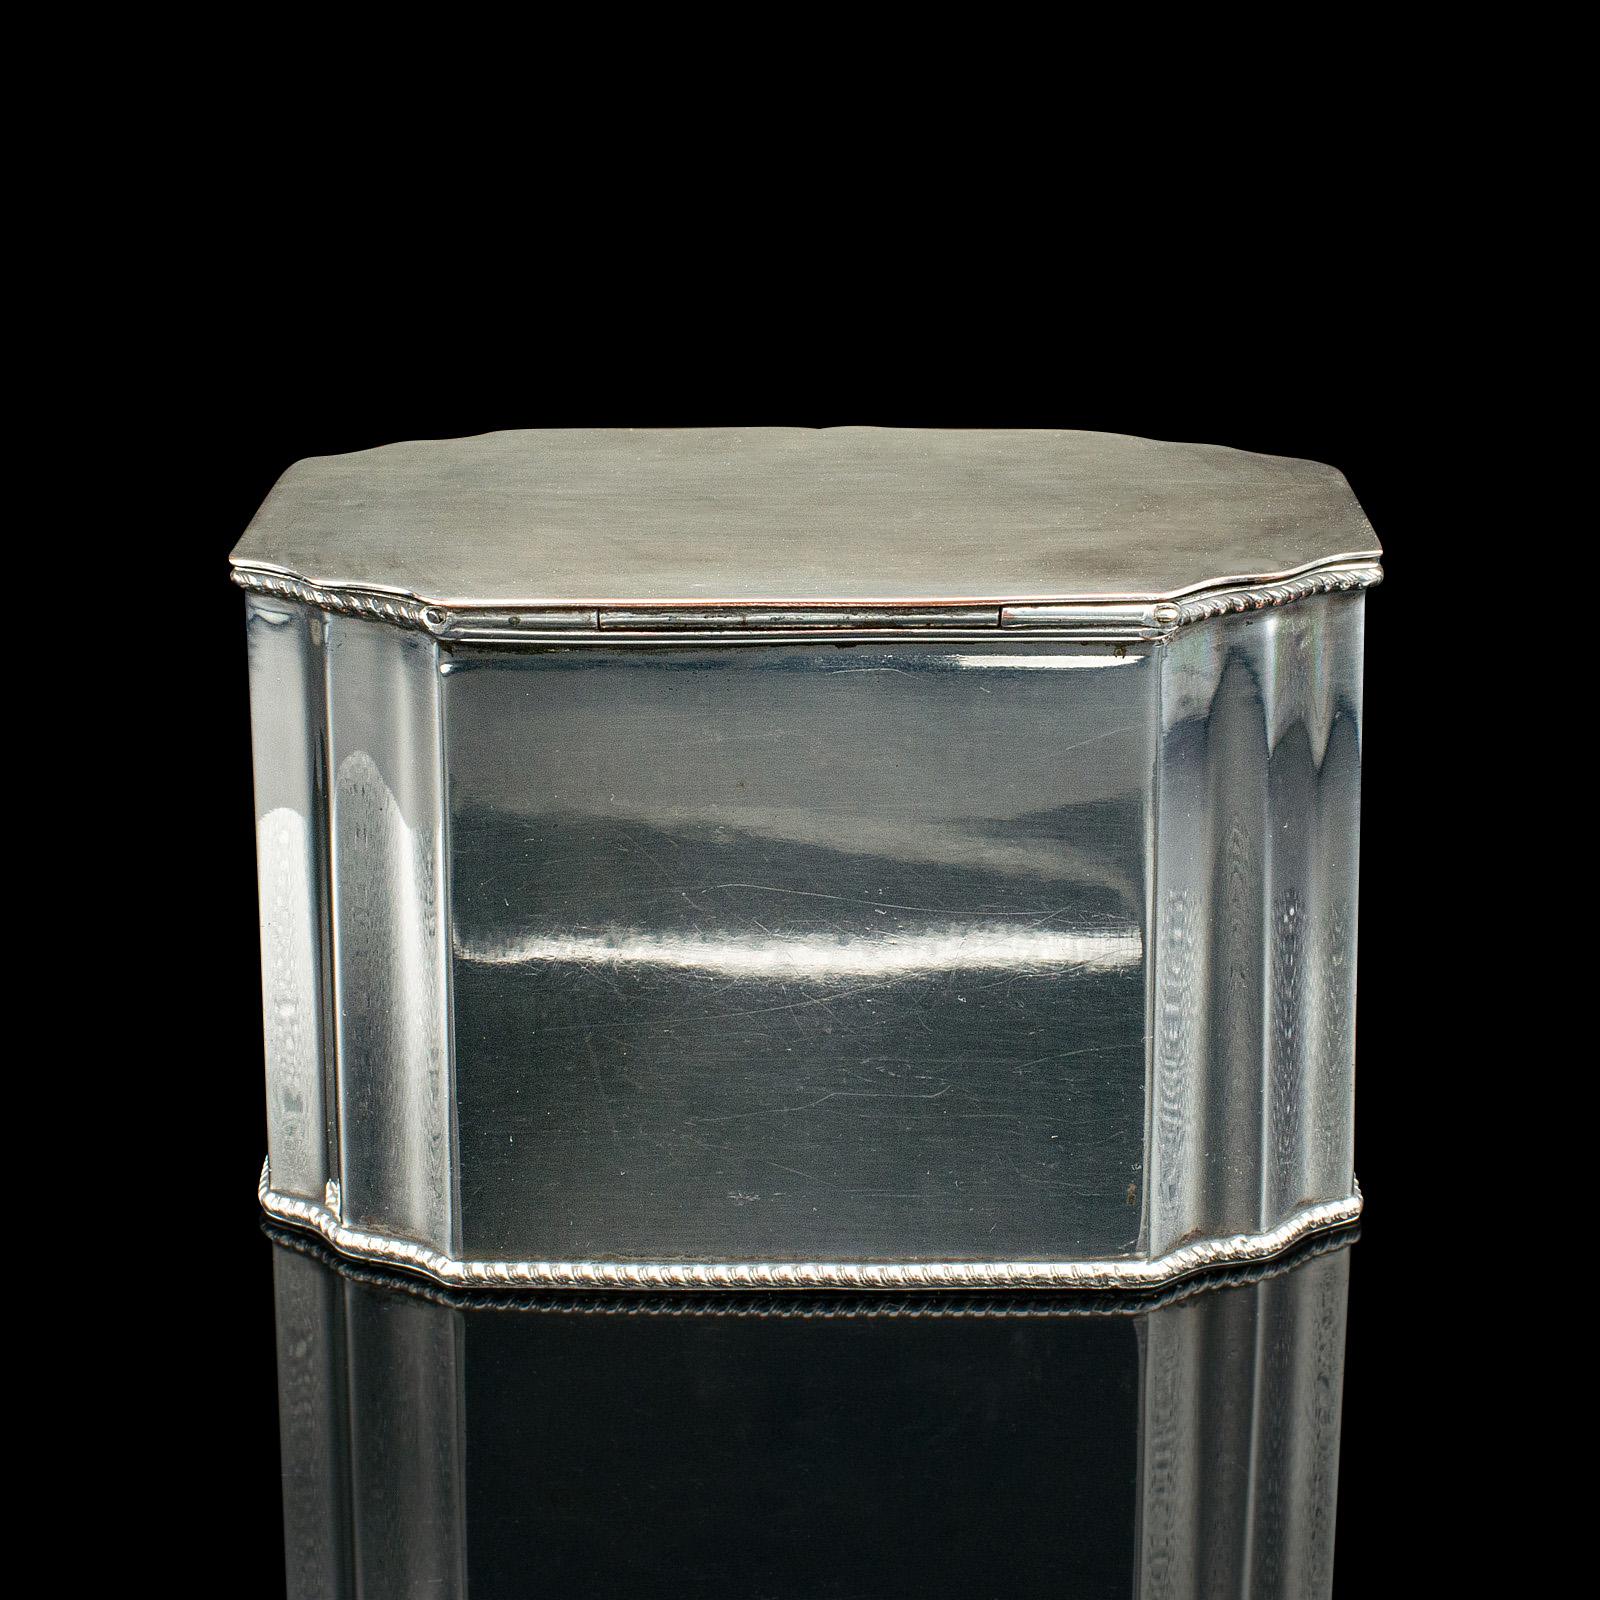 Antique Tiffin Box, English, Silver Plated, Tea Caddy, Edwardian, Circa 1910 In Good Condition For Sale In Hele, Devon, GB